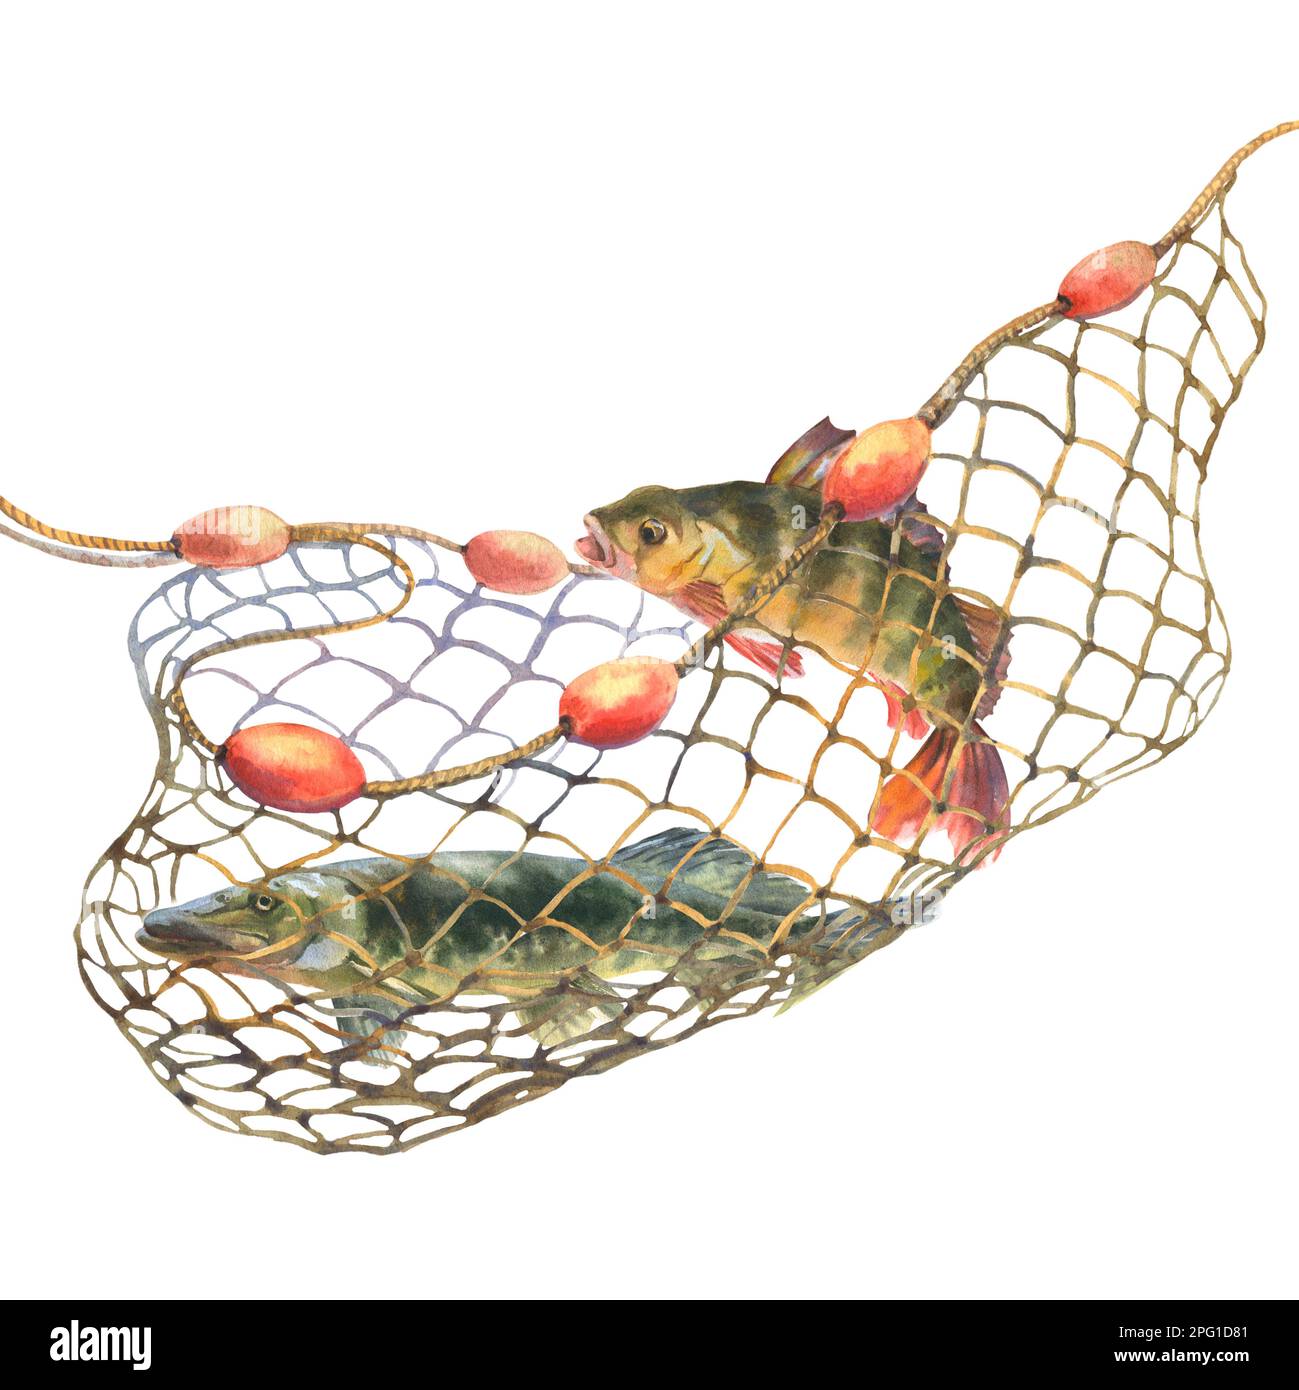 Watercolor illustration, fish caught in a fishing net. Perch and